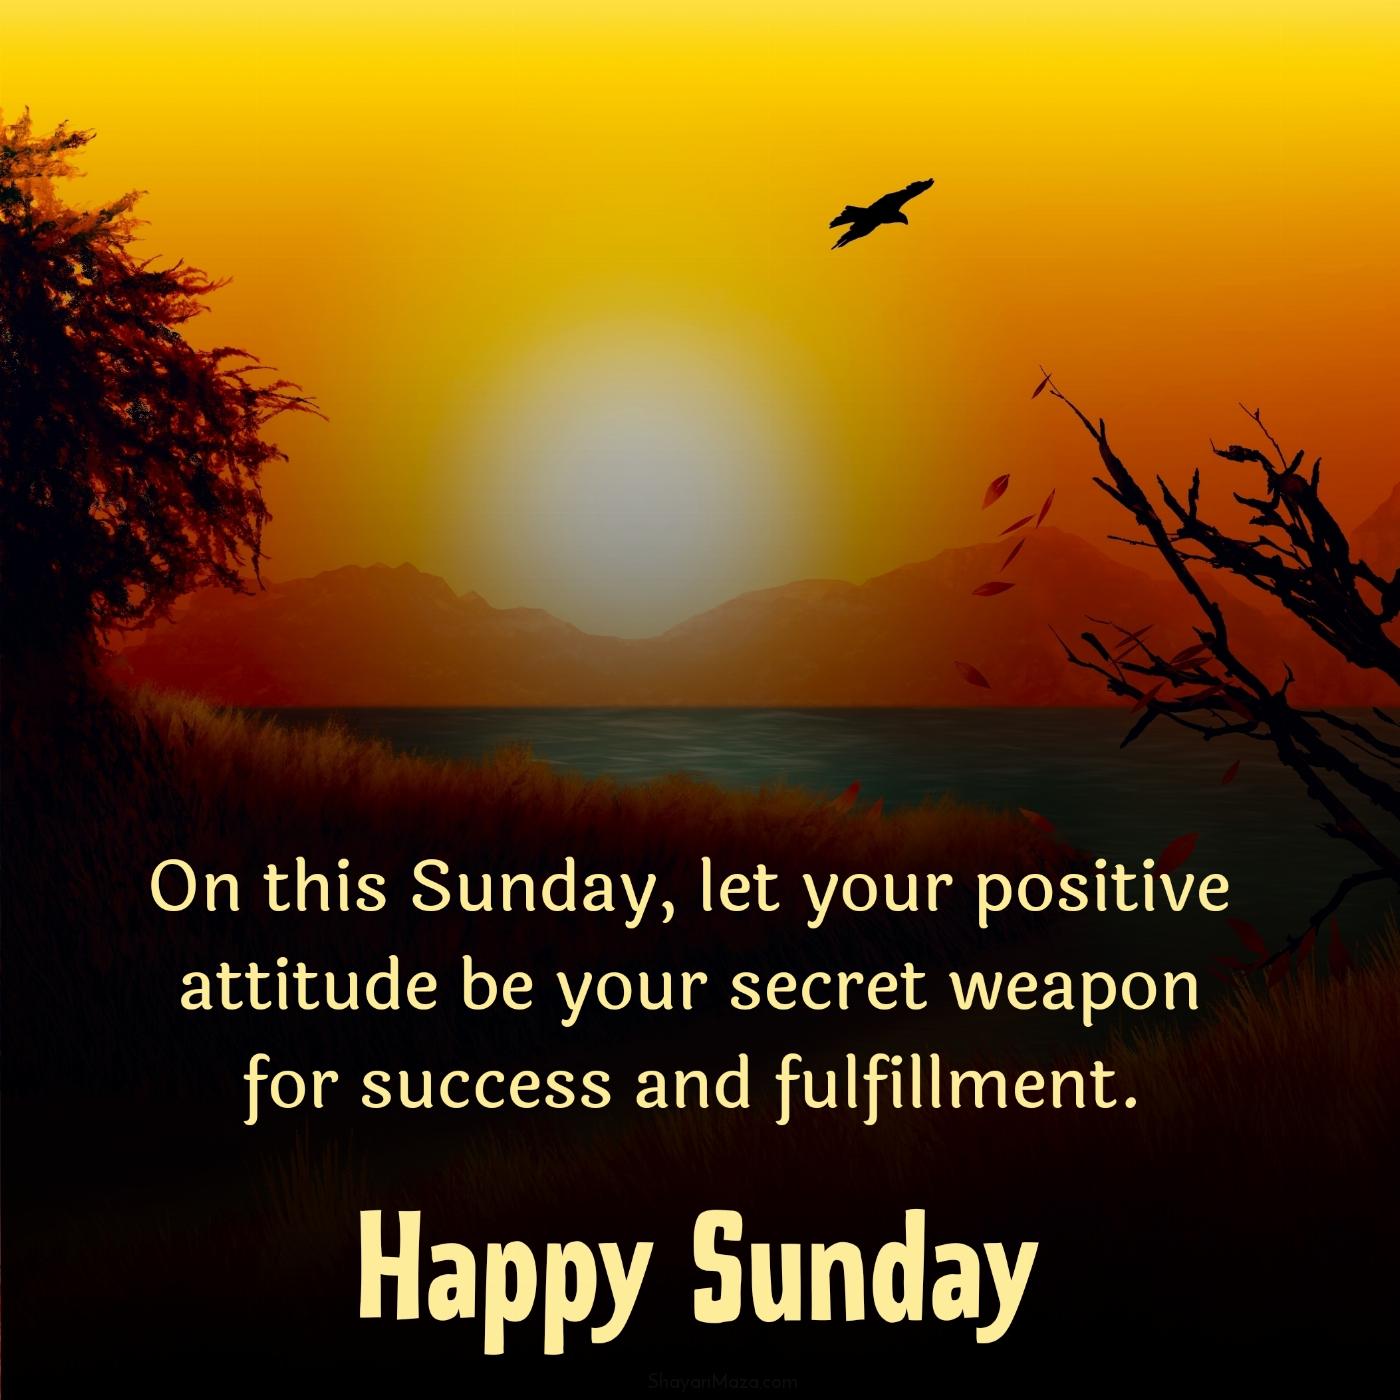 On this Sunday let your positive attitude be your secret weapon